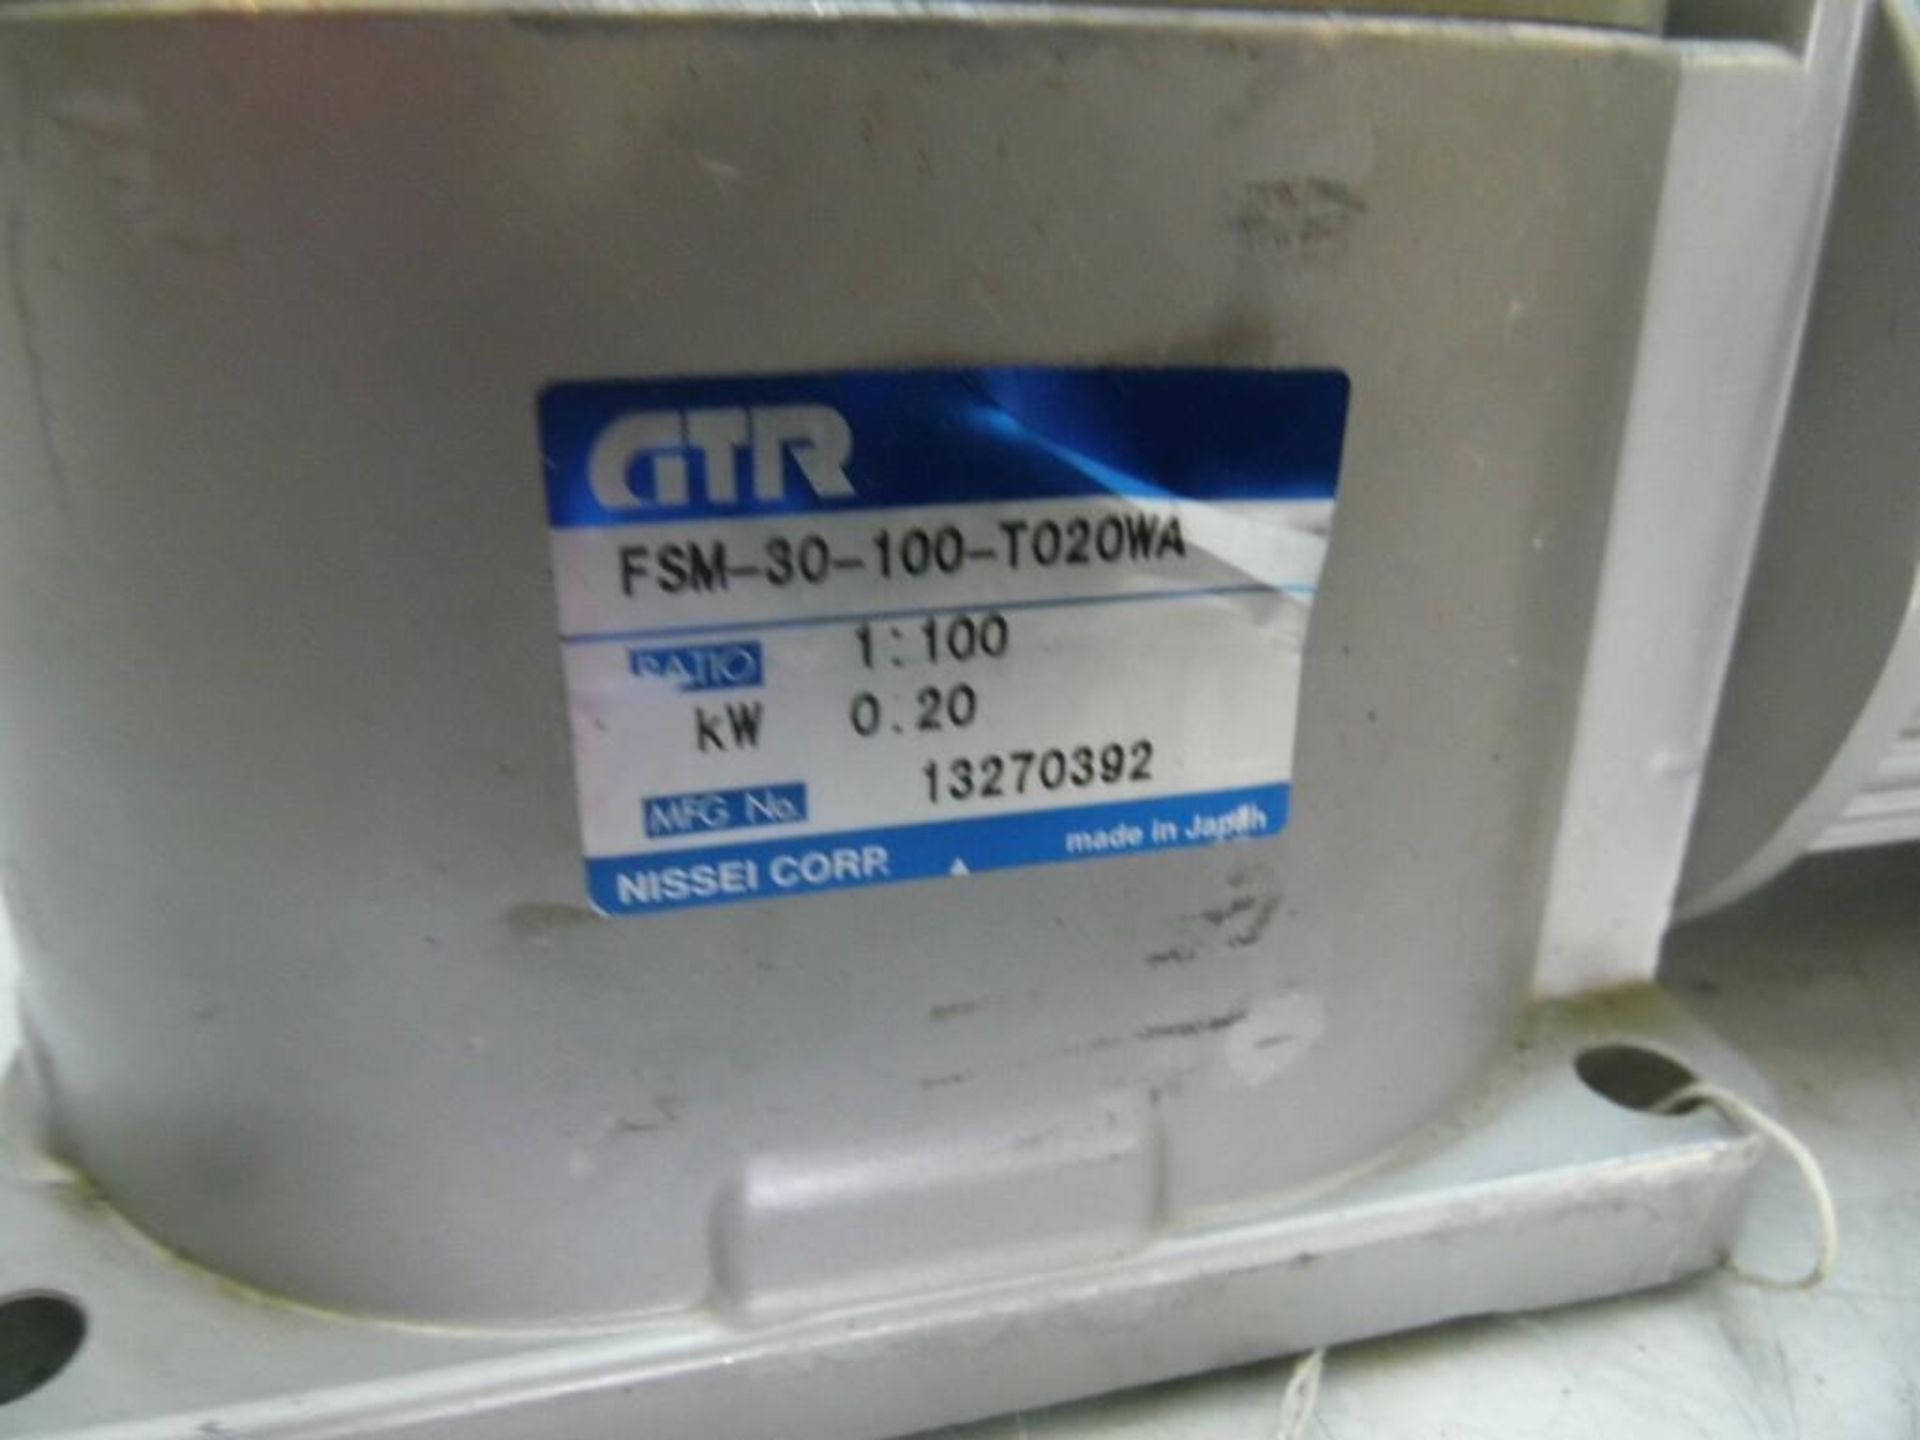 Lot of (2) GTR Induction Geared Motor, FSM-30-100-T020WA, 0.4 kW, Ratio 1:100 - Image 3 of 4